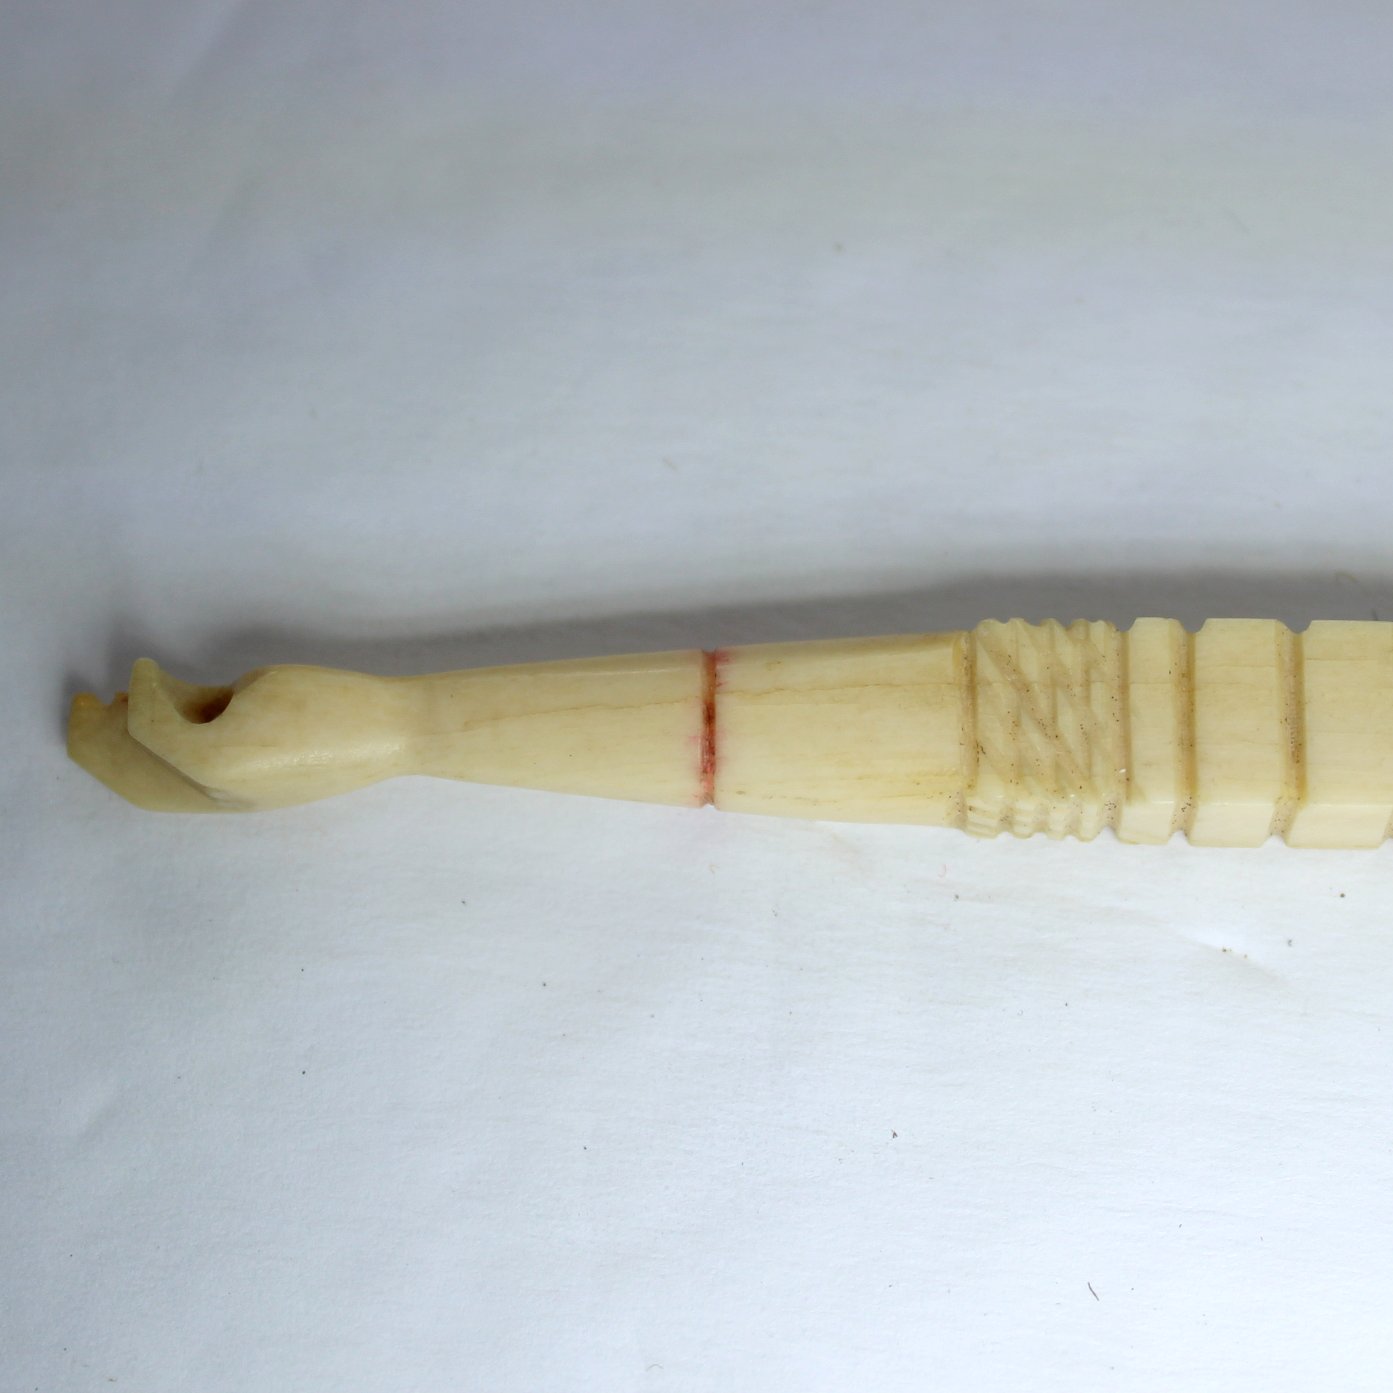 Exquisite Collectible Antique Bone Ivory Crochet Hook Carved Hand Top Decorated Handle view of material closeup